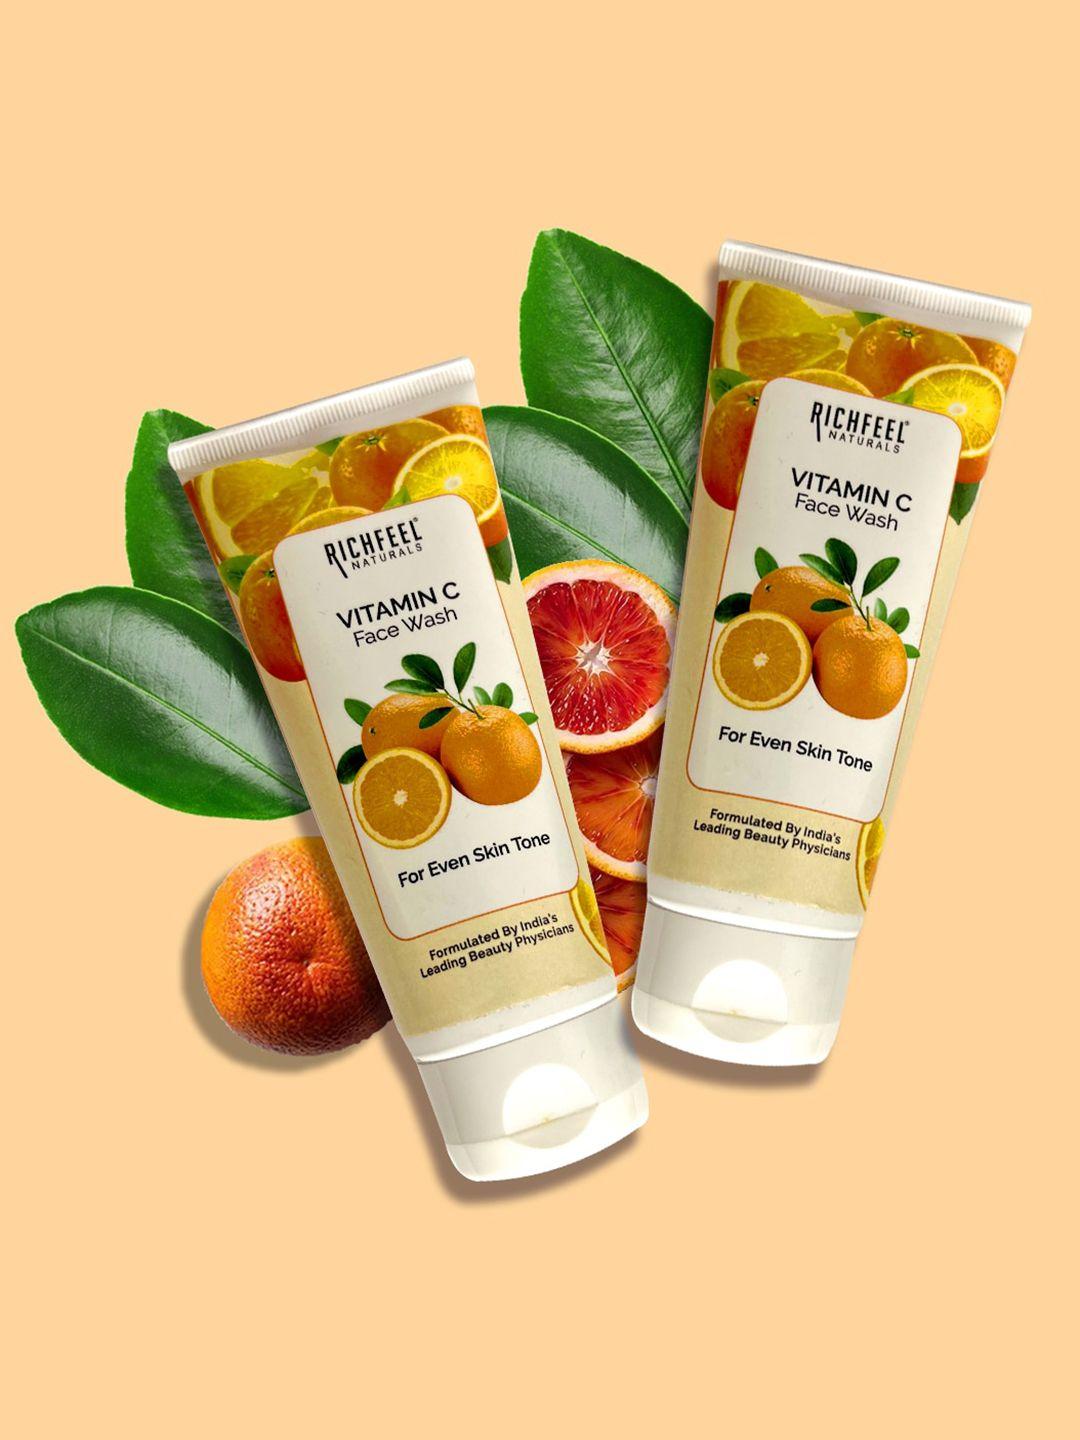 richfeel set of 2 vitamin c face wash for even skin tone - 100 g each